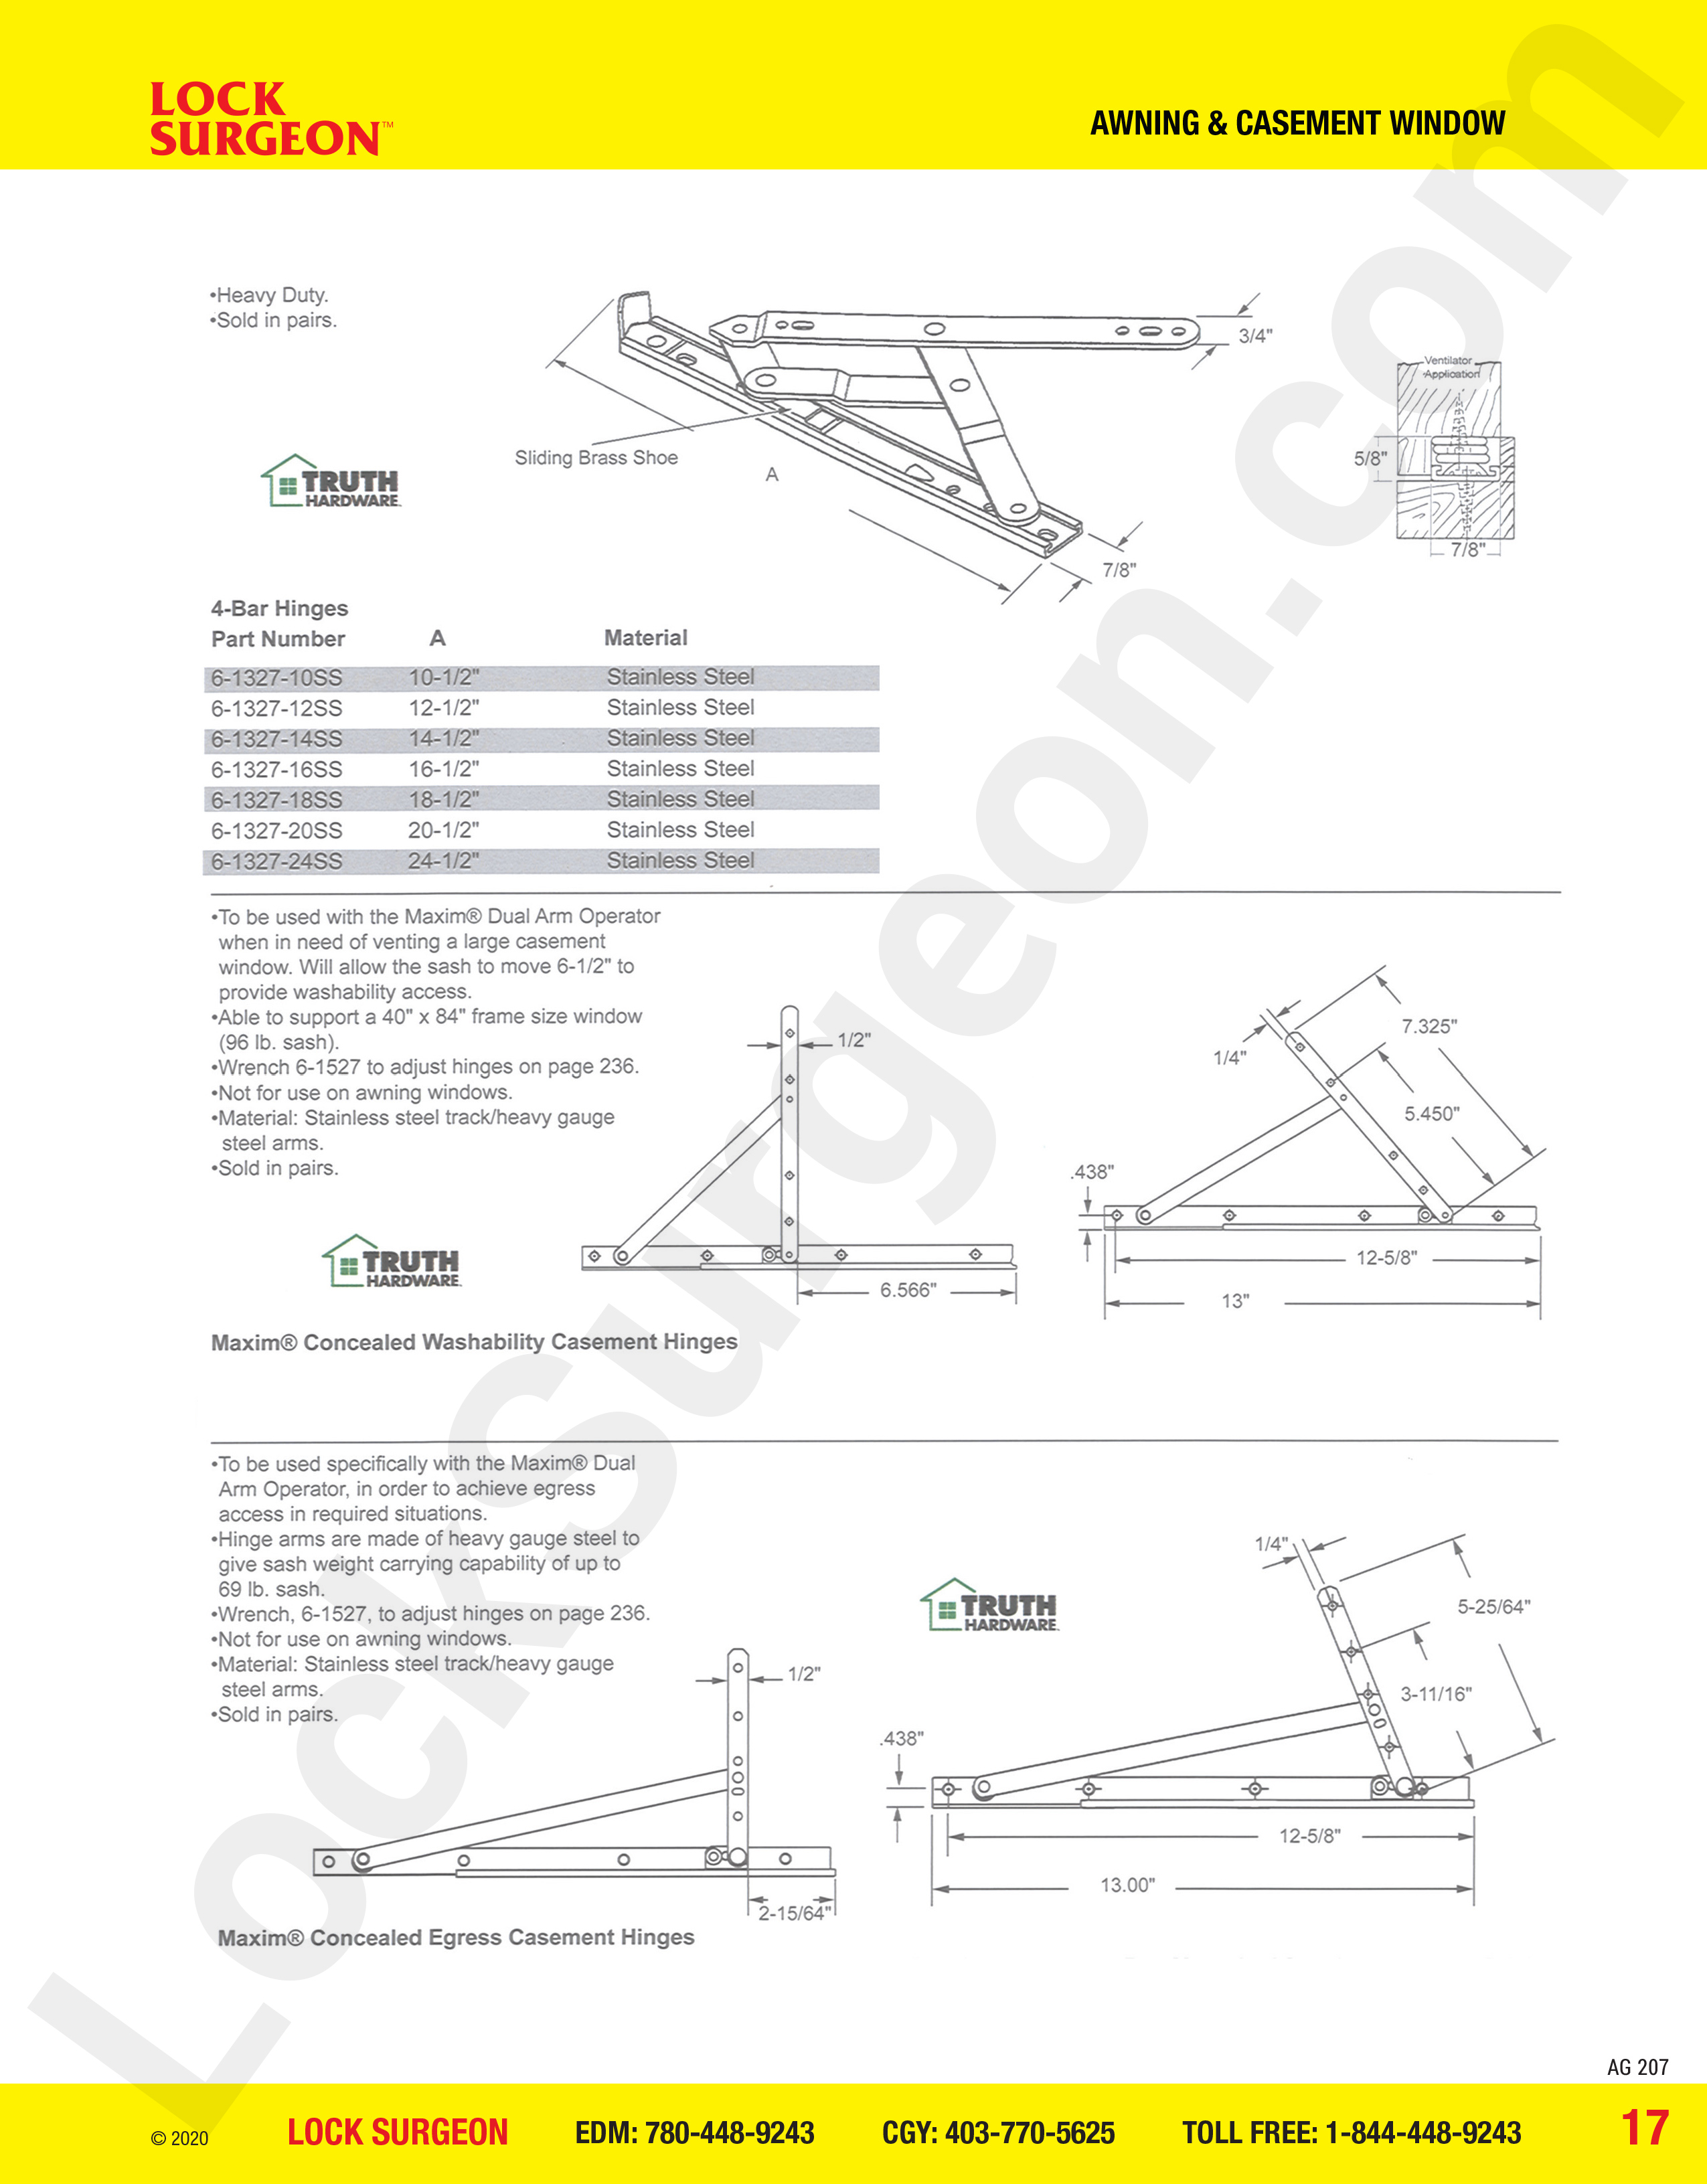 awning and casement window parts for maxim hinges